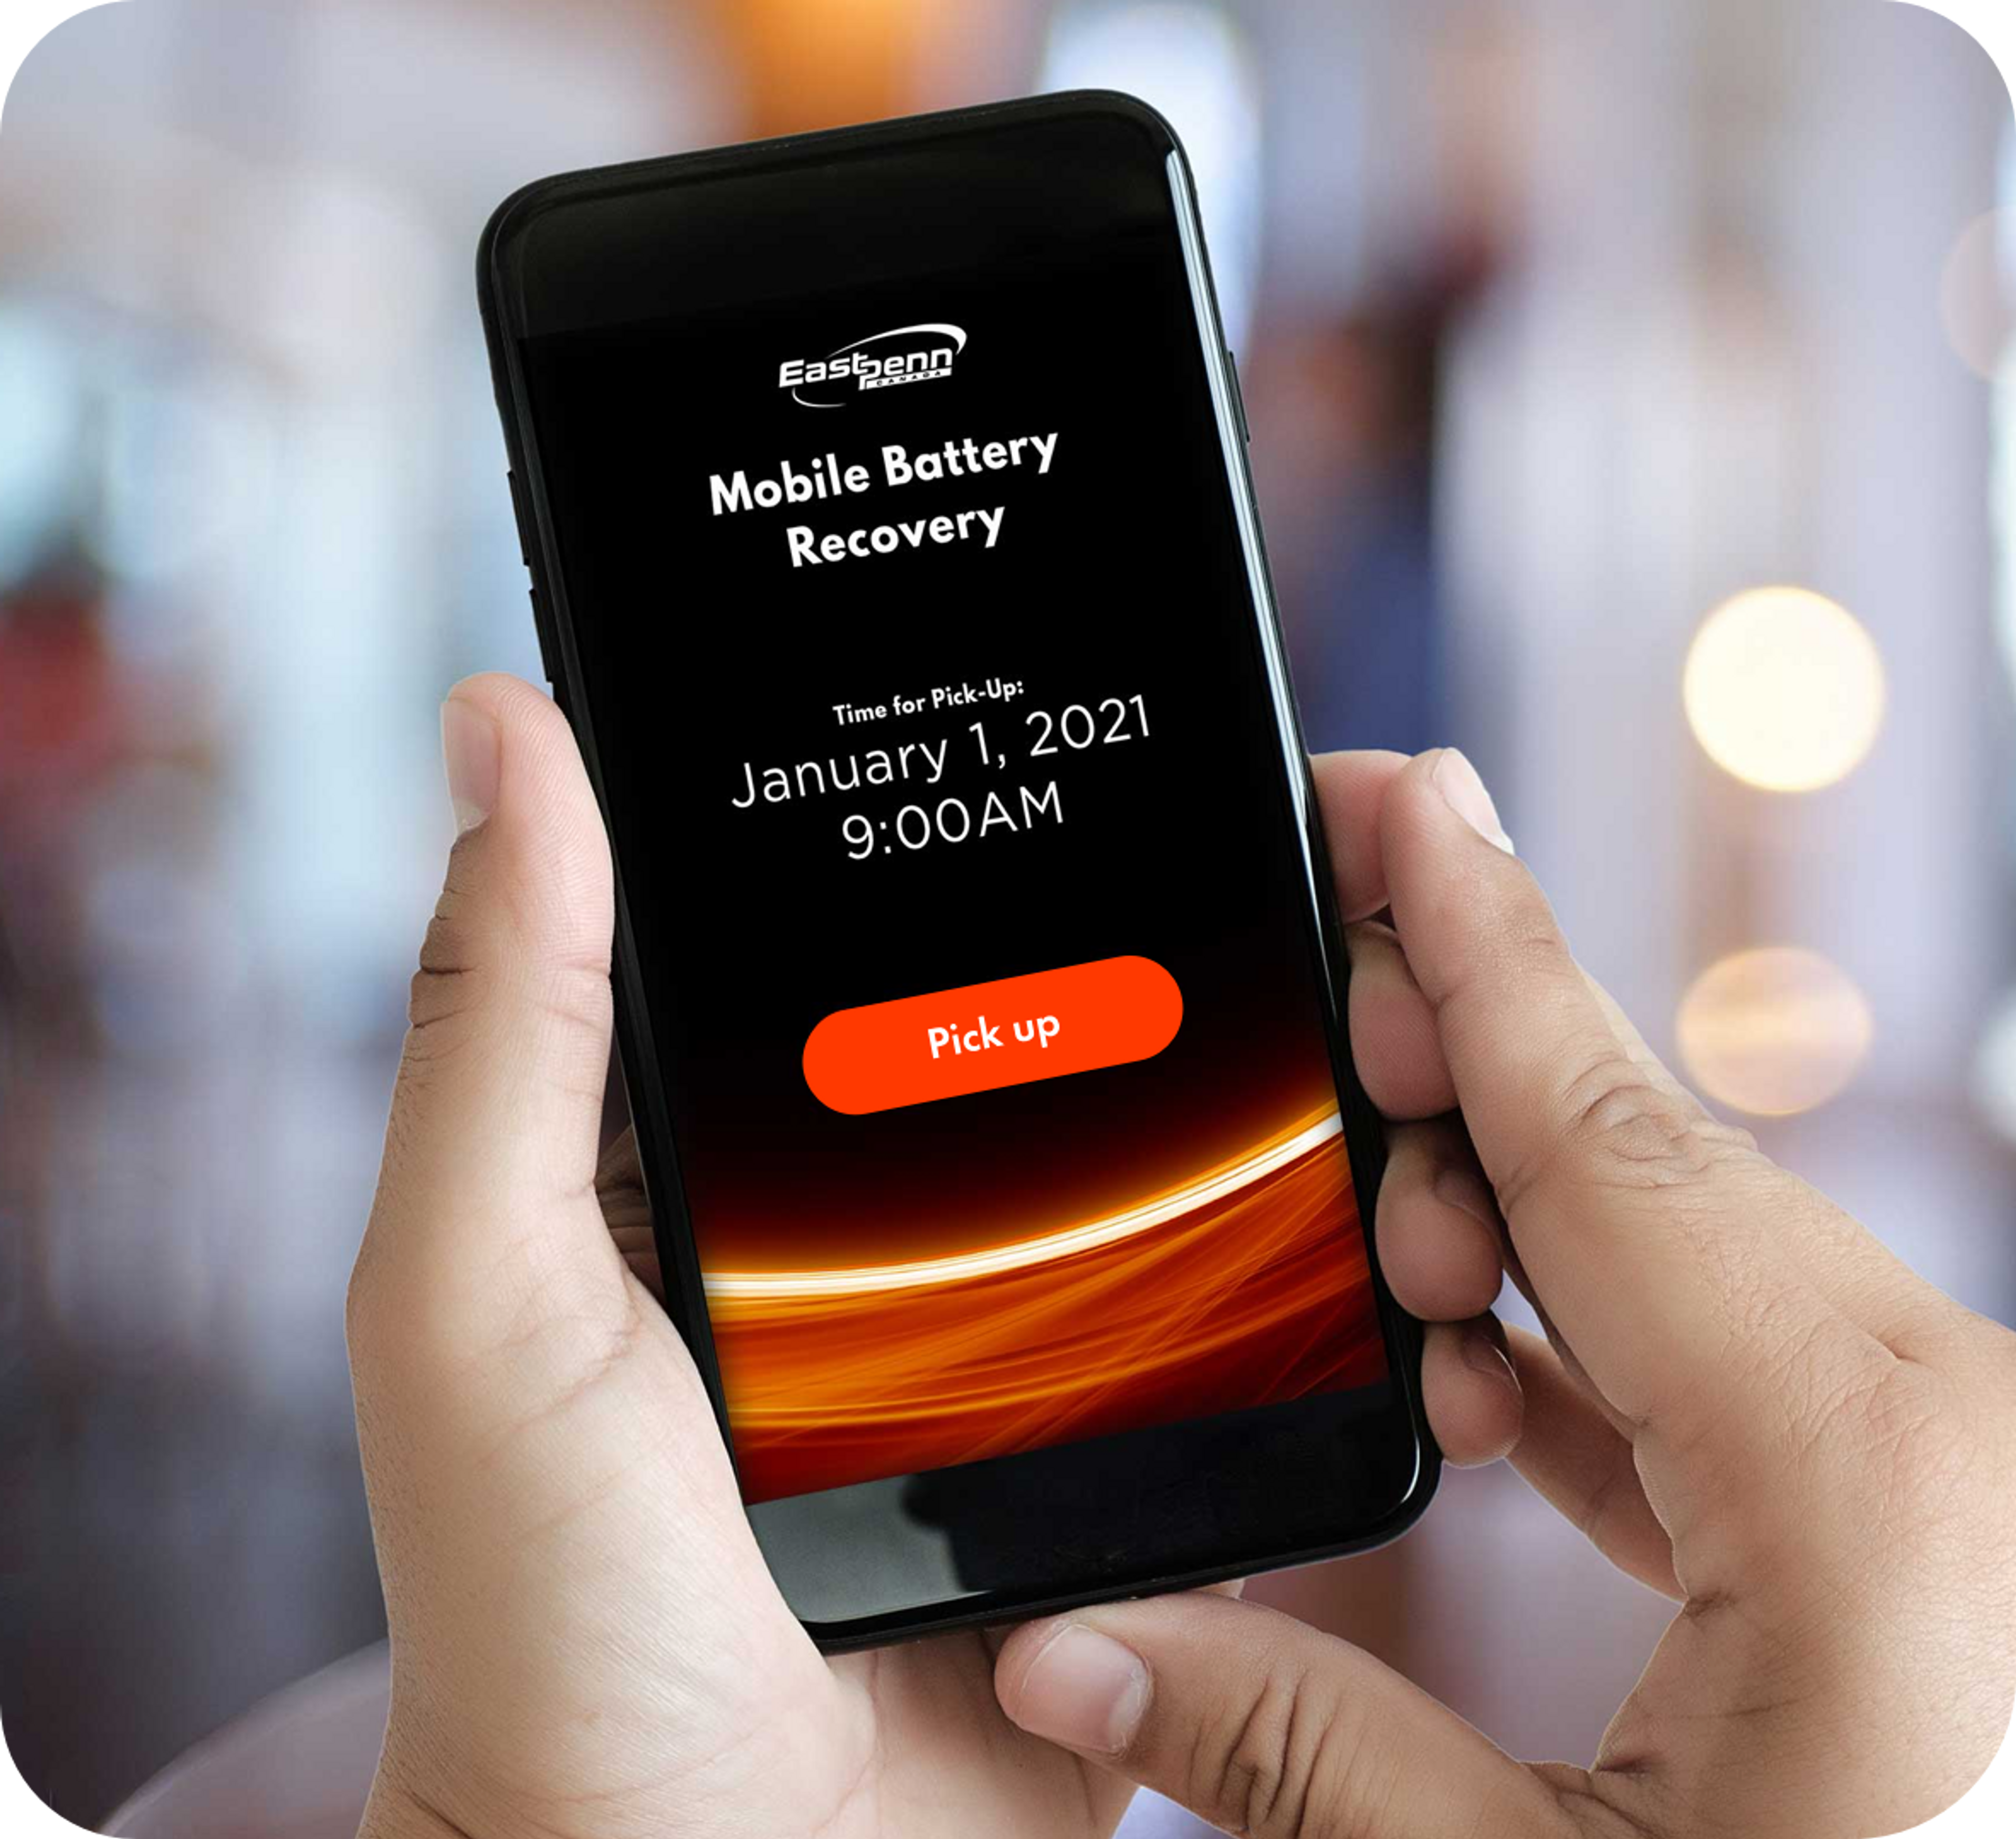 Picture of a man holding a phone in his hands with the screen showing East Penn Mobile Battery recovery app